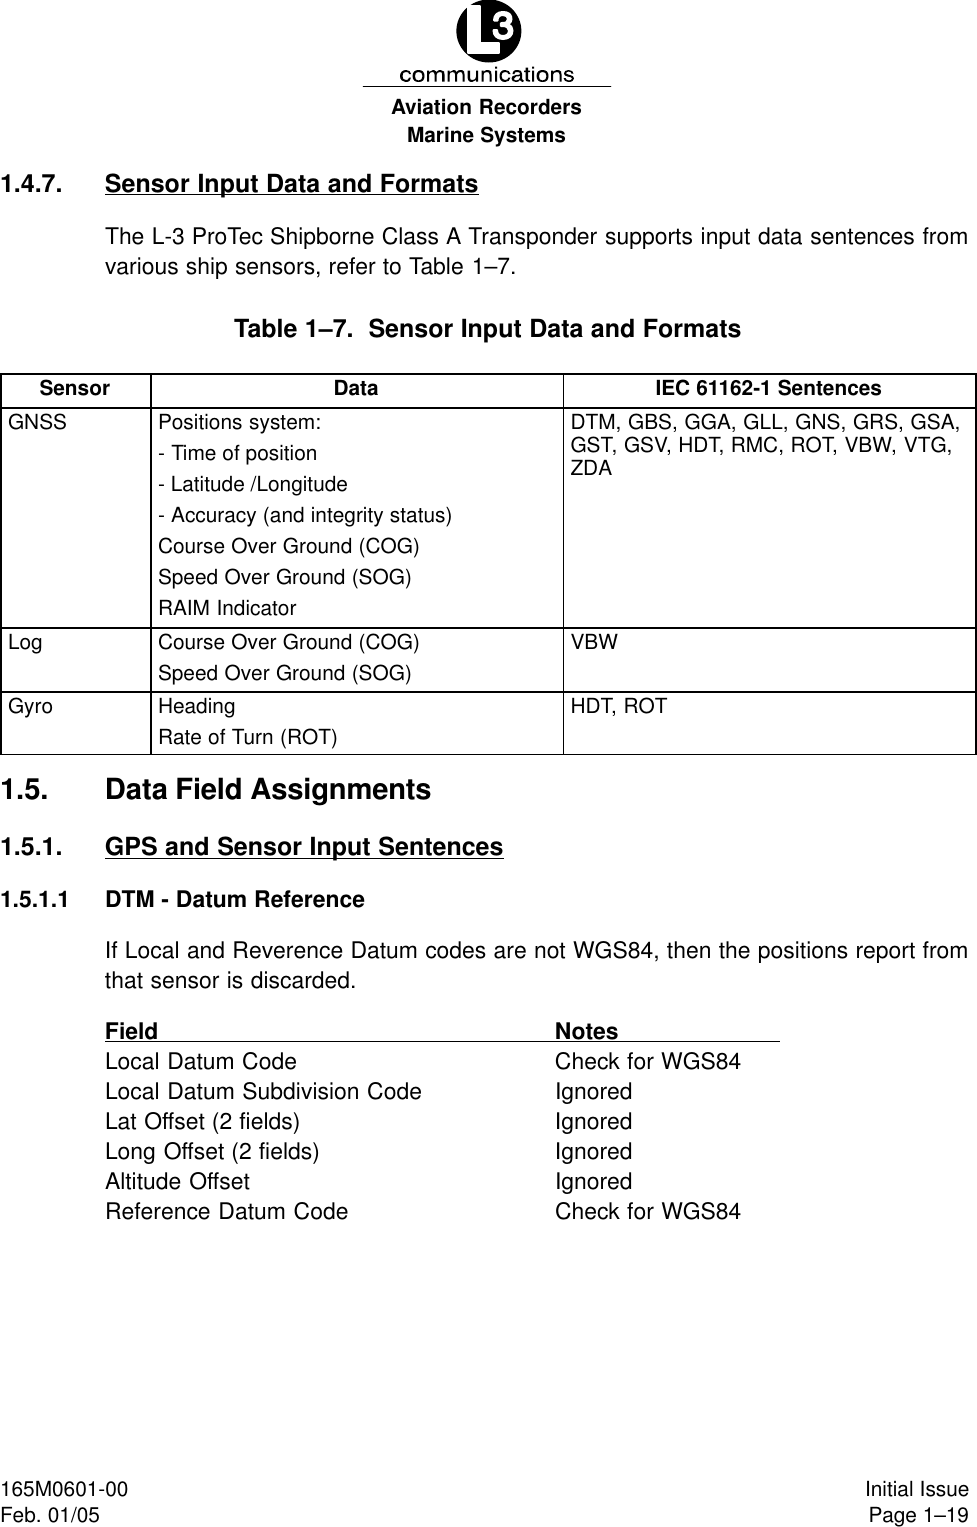 Marine SystemsAviation RecordersPage 1–19Initial Issue165M0601-00Feb. 01/051.4.7. Sensor Input Data and FormatsThe L-3 ProTec Shipborne Class A Transponder supports input data sentences fromvarious ship sensors, refer to Table 1–7.Table 1–7.  Sensor Input Data and FormatsSensor Data IEC 61162-1 SentencesGNSS Positions system:- Time of position- Latitude /Longitude- Accuracy (and integrity status)Course Over Ground (COG)Speed Over Ground (SOG)RAIM IndicatorDTM, GBS, GGA, GLL, GNS, GRS, GSA,GST, GSV, HDT, RMC, ROT, VBW, VTG,ZDALog Course Over Ground (COG)Speed Over Ground (SOG)VBWGyro HeadingRate of Turn (ROT)HDT, ROT1.5. Data Field Assignments1.5.1. GPS and Sensor Input Sentences1.5.1.1 DTM - Datum ReferenceIf Local and Reverence Datum codes are not WGS84, then the positions report fromthat sensor is discarded.Field NotesLocal Datum Code Check for WGS84Local Datum Subdivision Code IgnoredLat Offset (2 fields) IgnoredLong Offset (2 fields) IgnoredAltitude Offset IgnoredReference Datum Code Check for WGS84